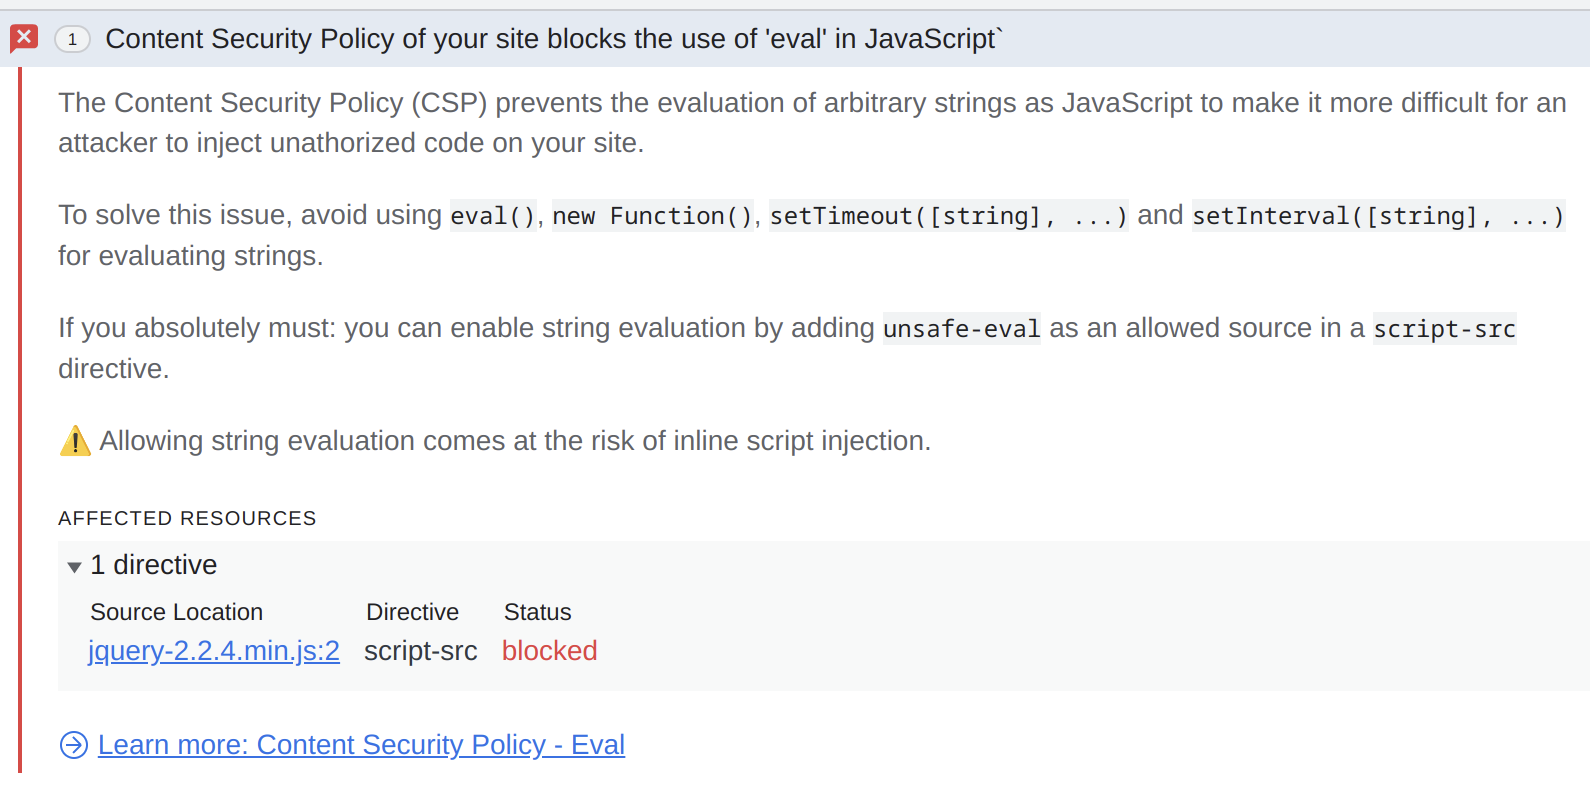 Screenshot with the text “Content Security Policy of your site blocks the use of 'eval' in JavaScript” indicating an issue in jquery-2.2.4.min.js